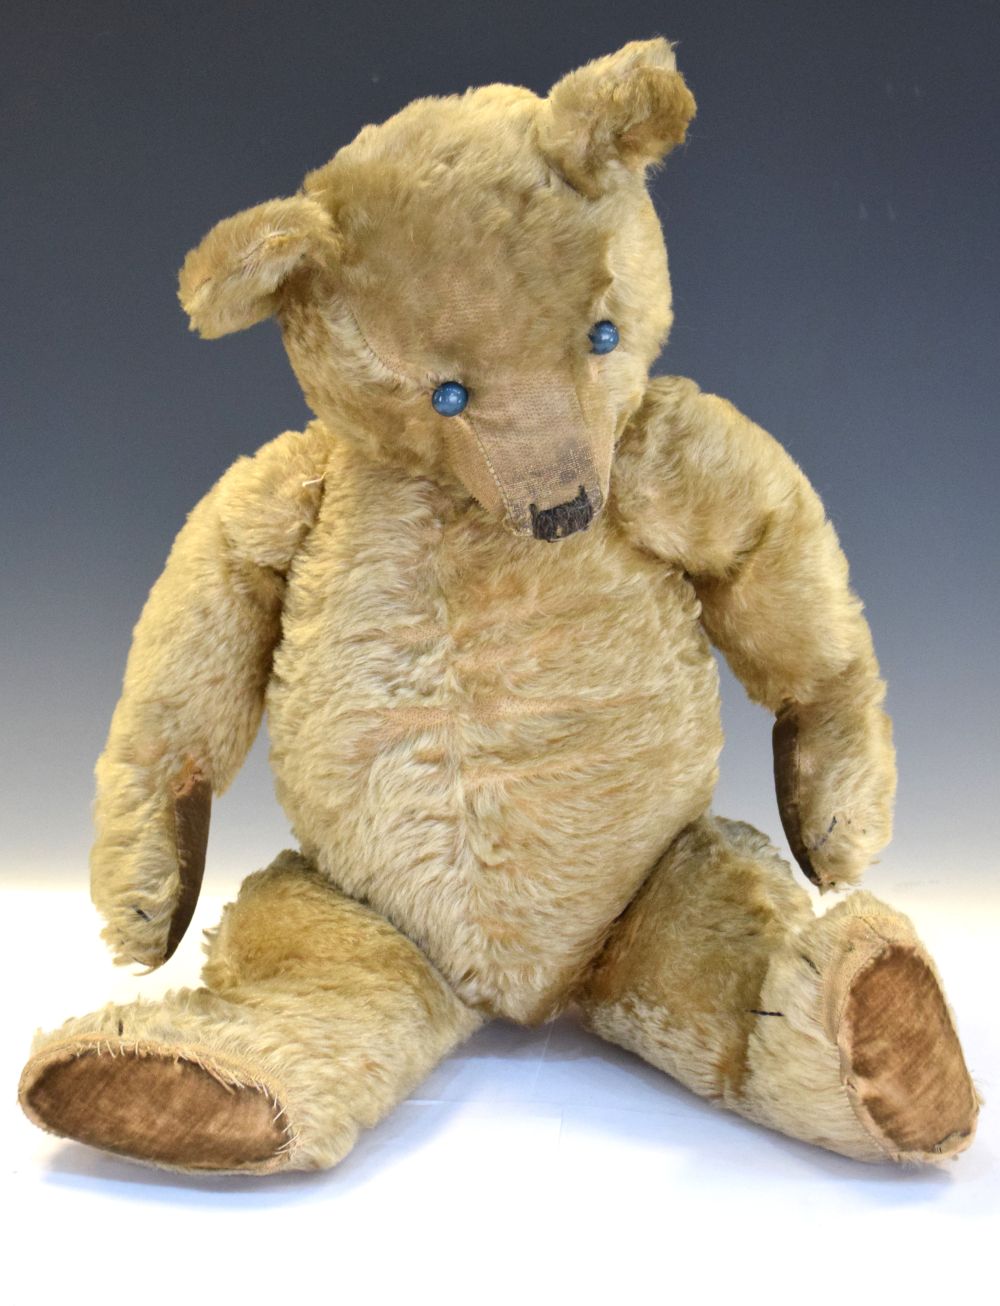 Early 20th Century golden mohair teddy bear, 60cm high Condition: Loss of mohair in places, would